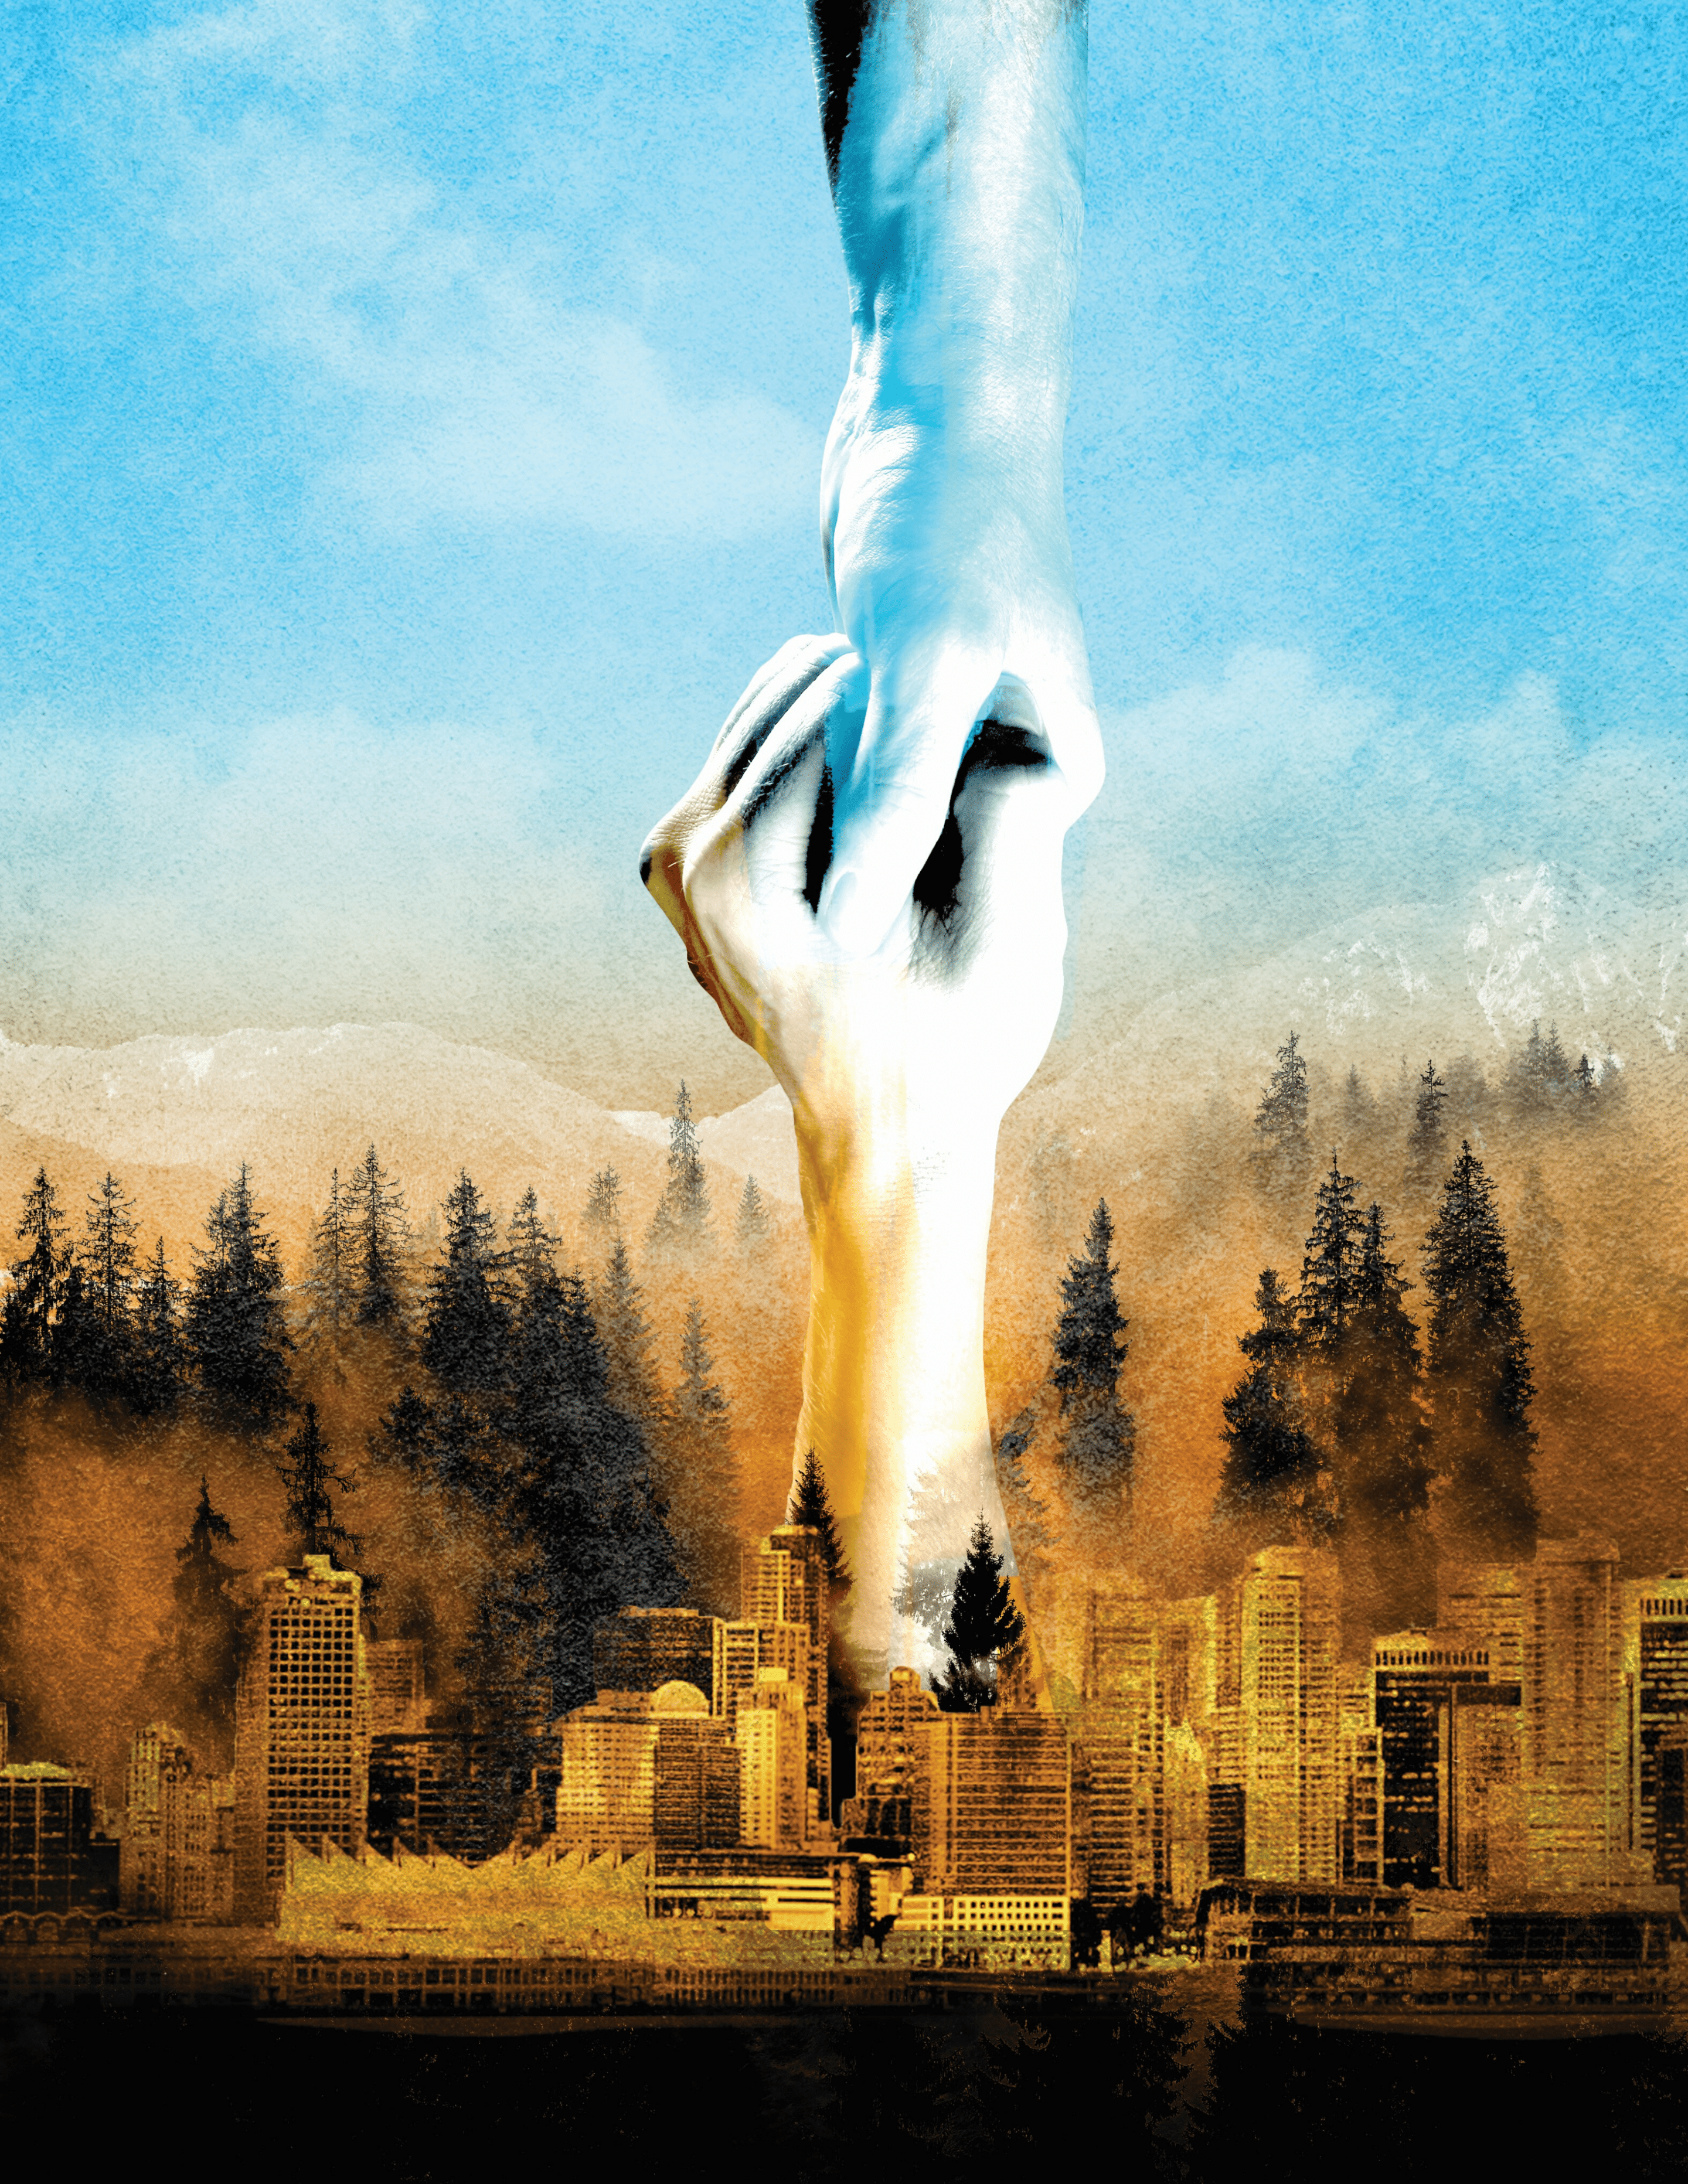 An illustration of two hands clasped. One is lifting the other up from a cityscape towards the mountains